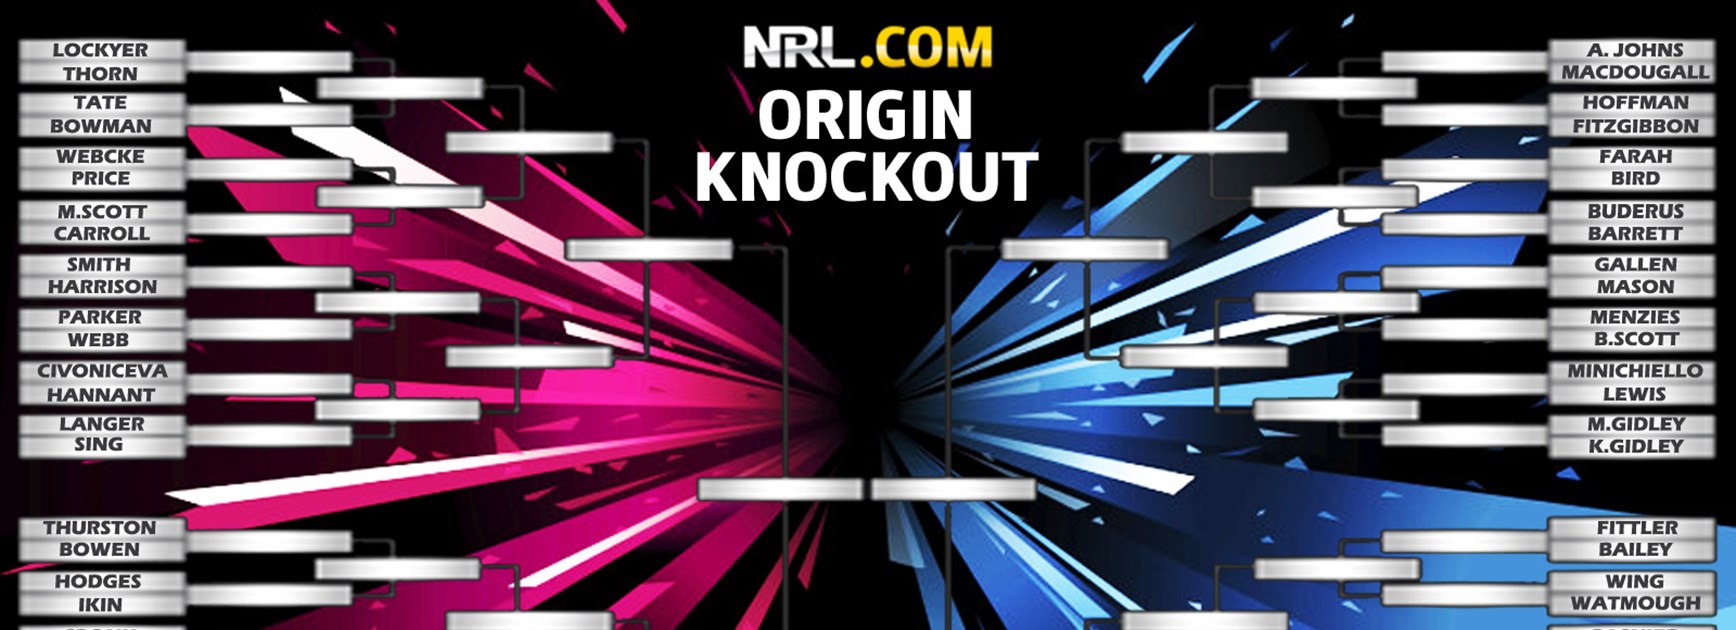 Which player will prevail in NRL.com's Origin Knockout poll?